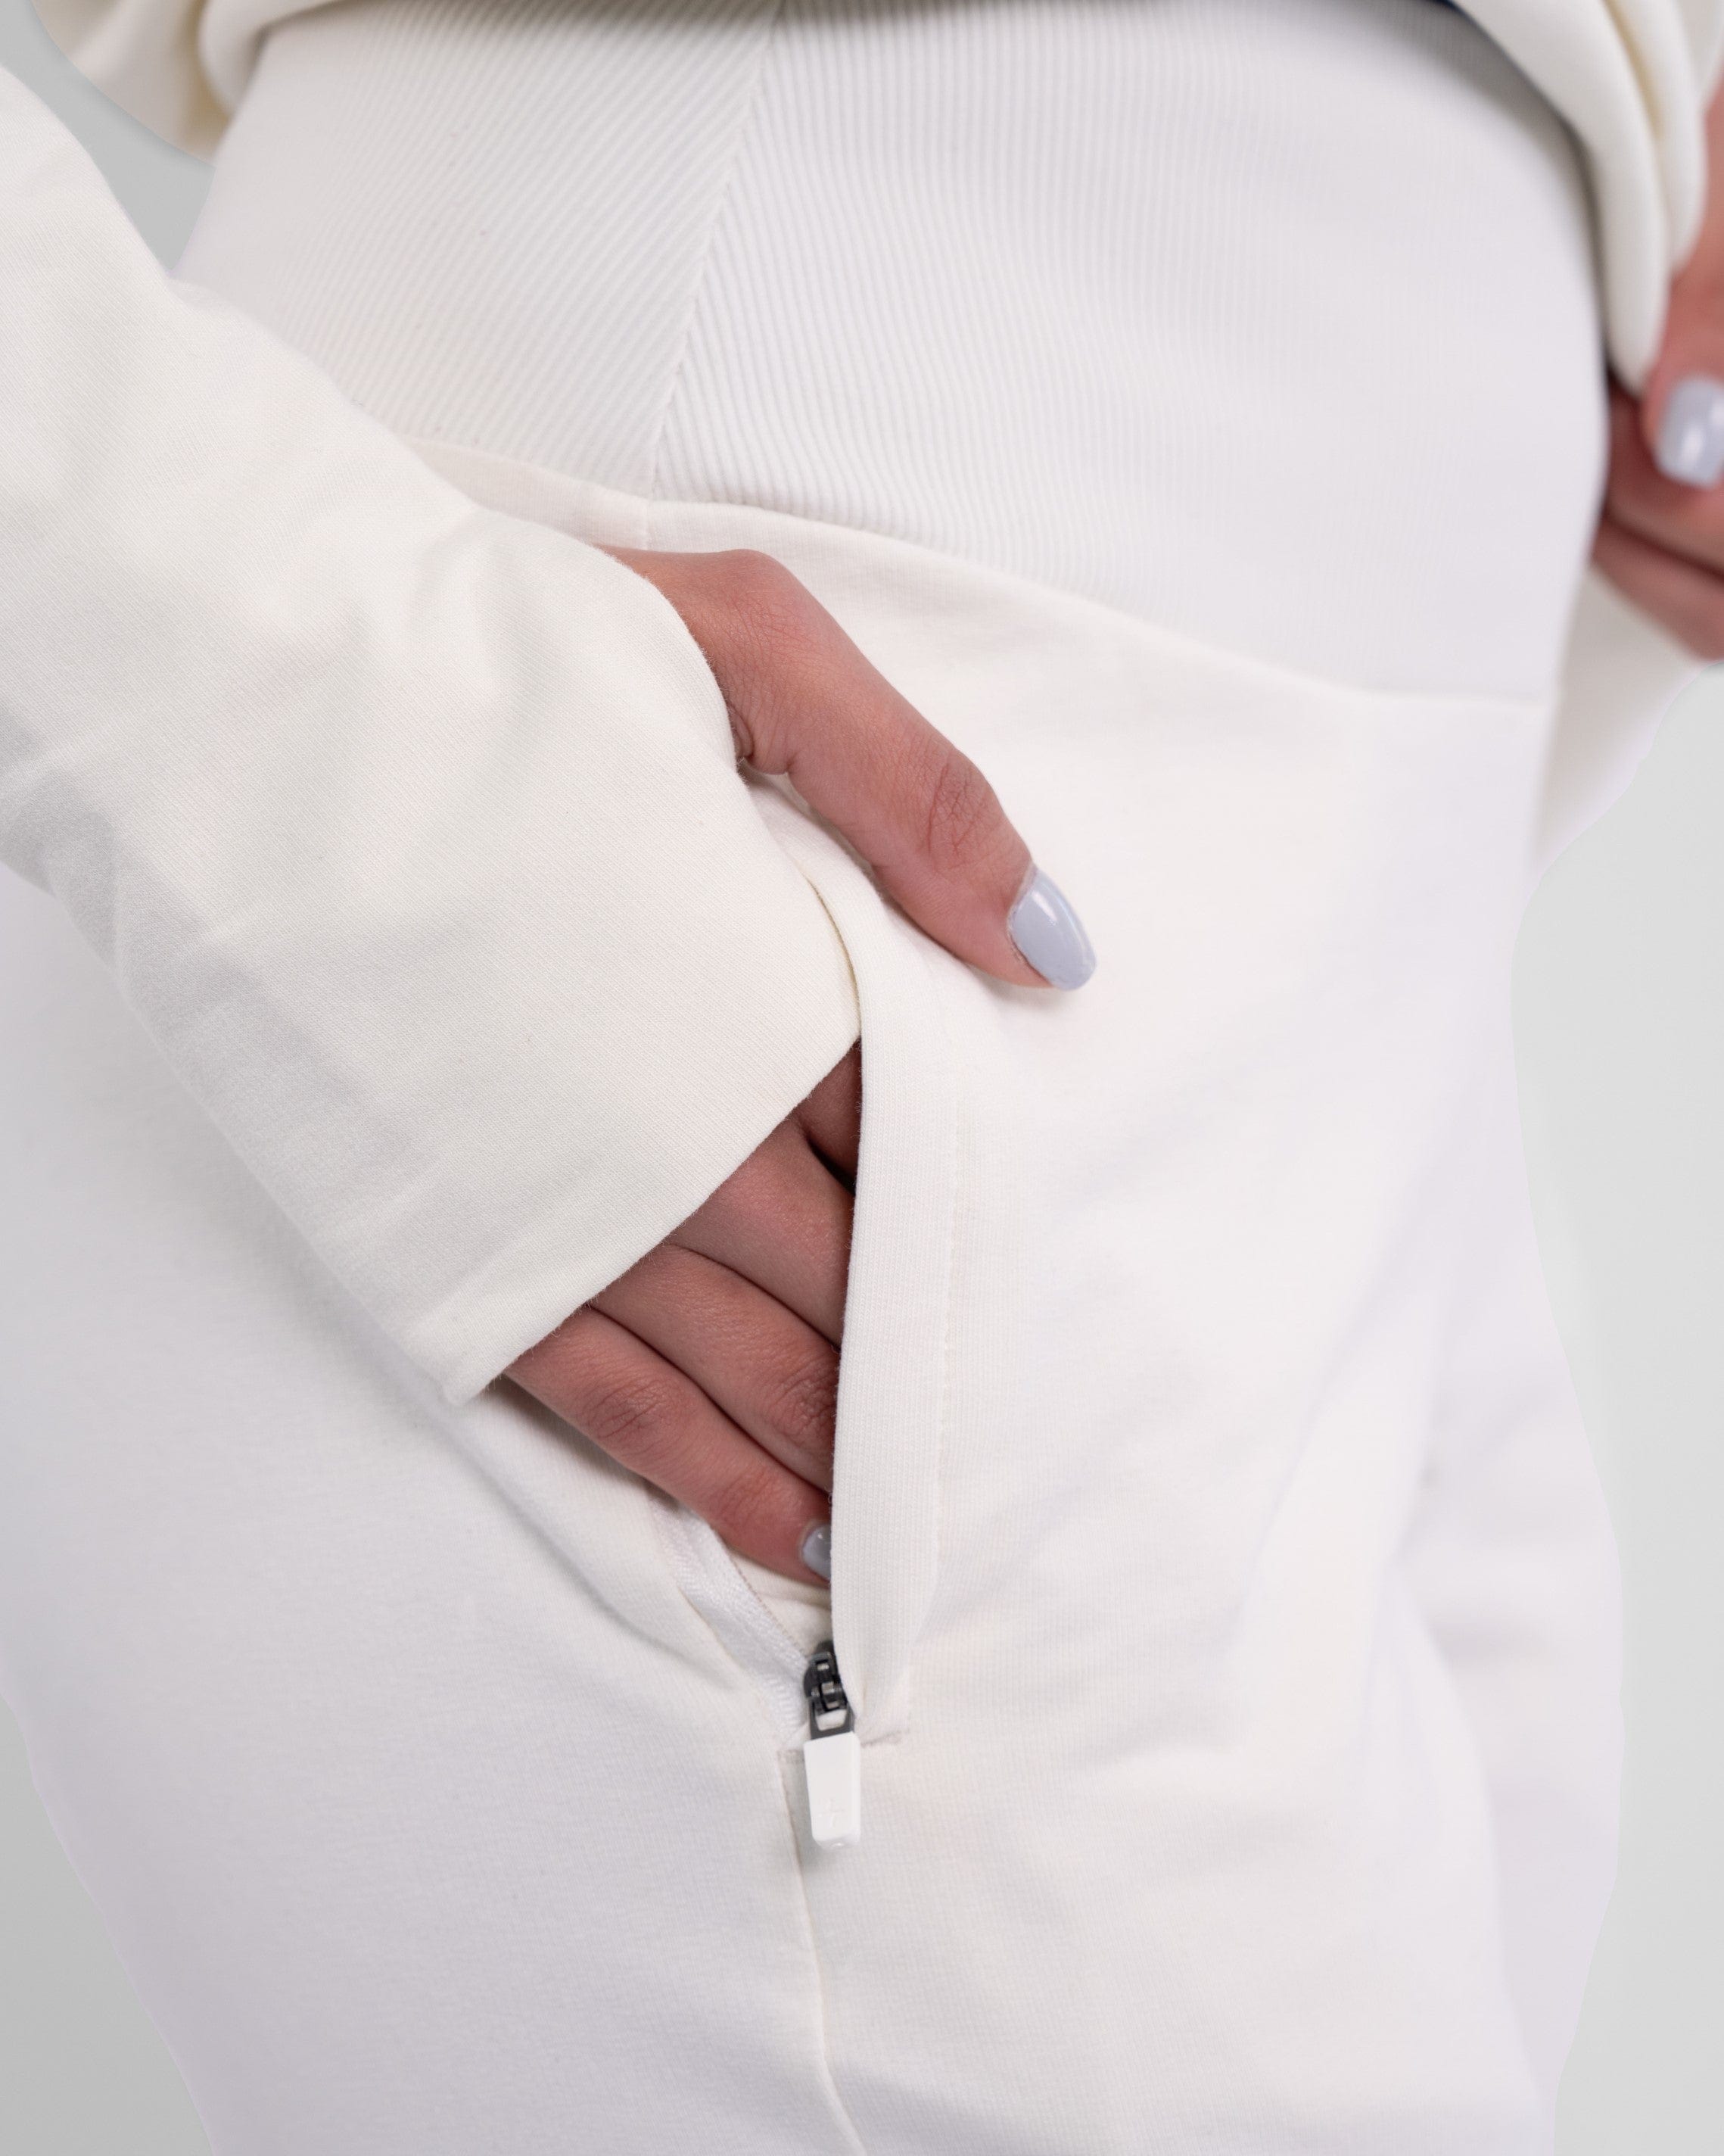 A close-up of a woman in an Off White CANTARA PANTS outfit with their hand in the pocket, showcasing a modern and minimalist fashion style by qynda.